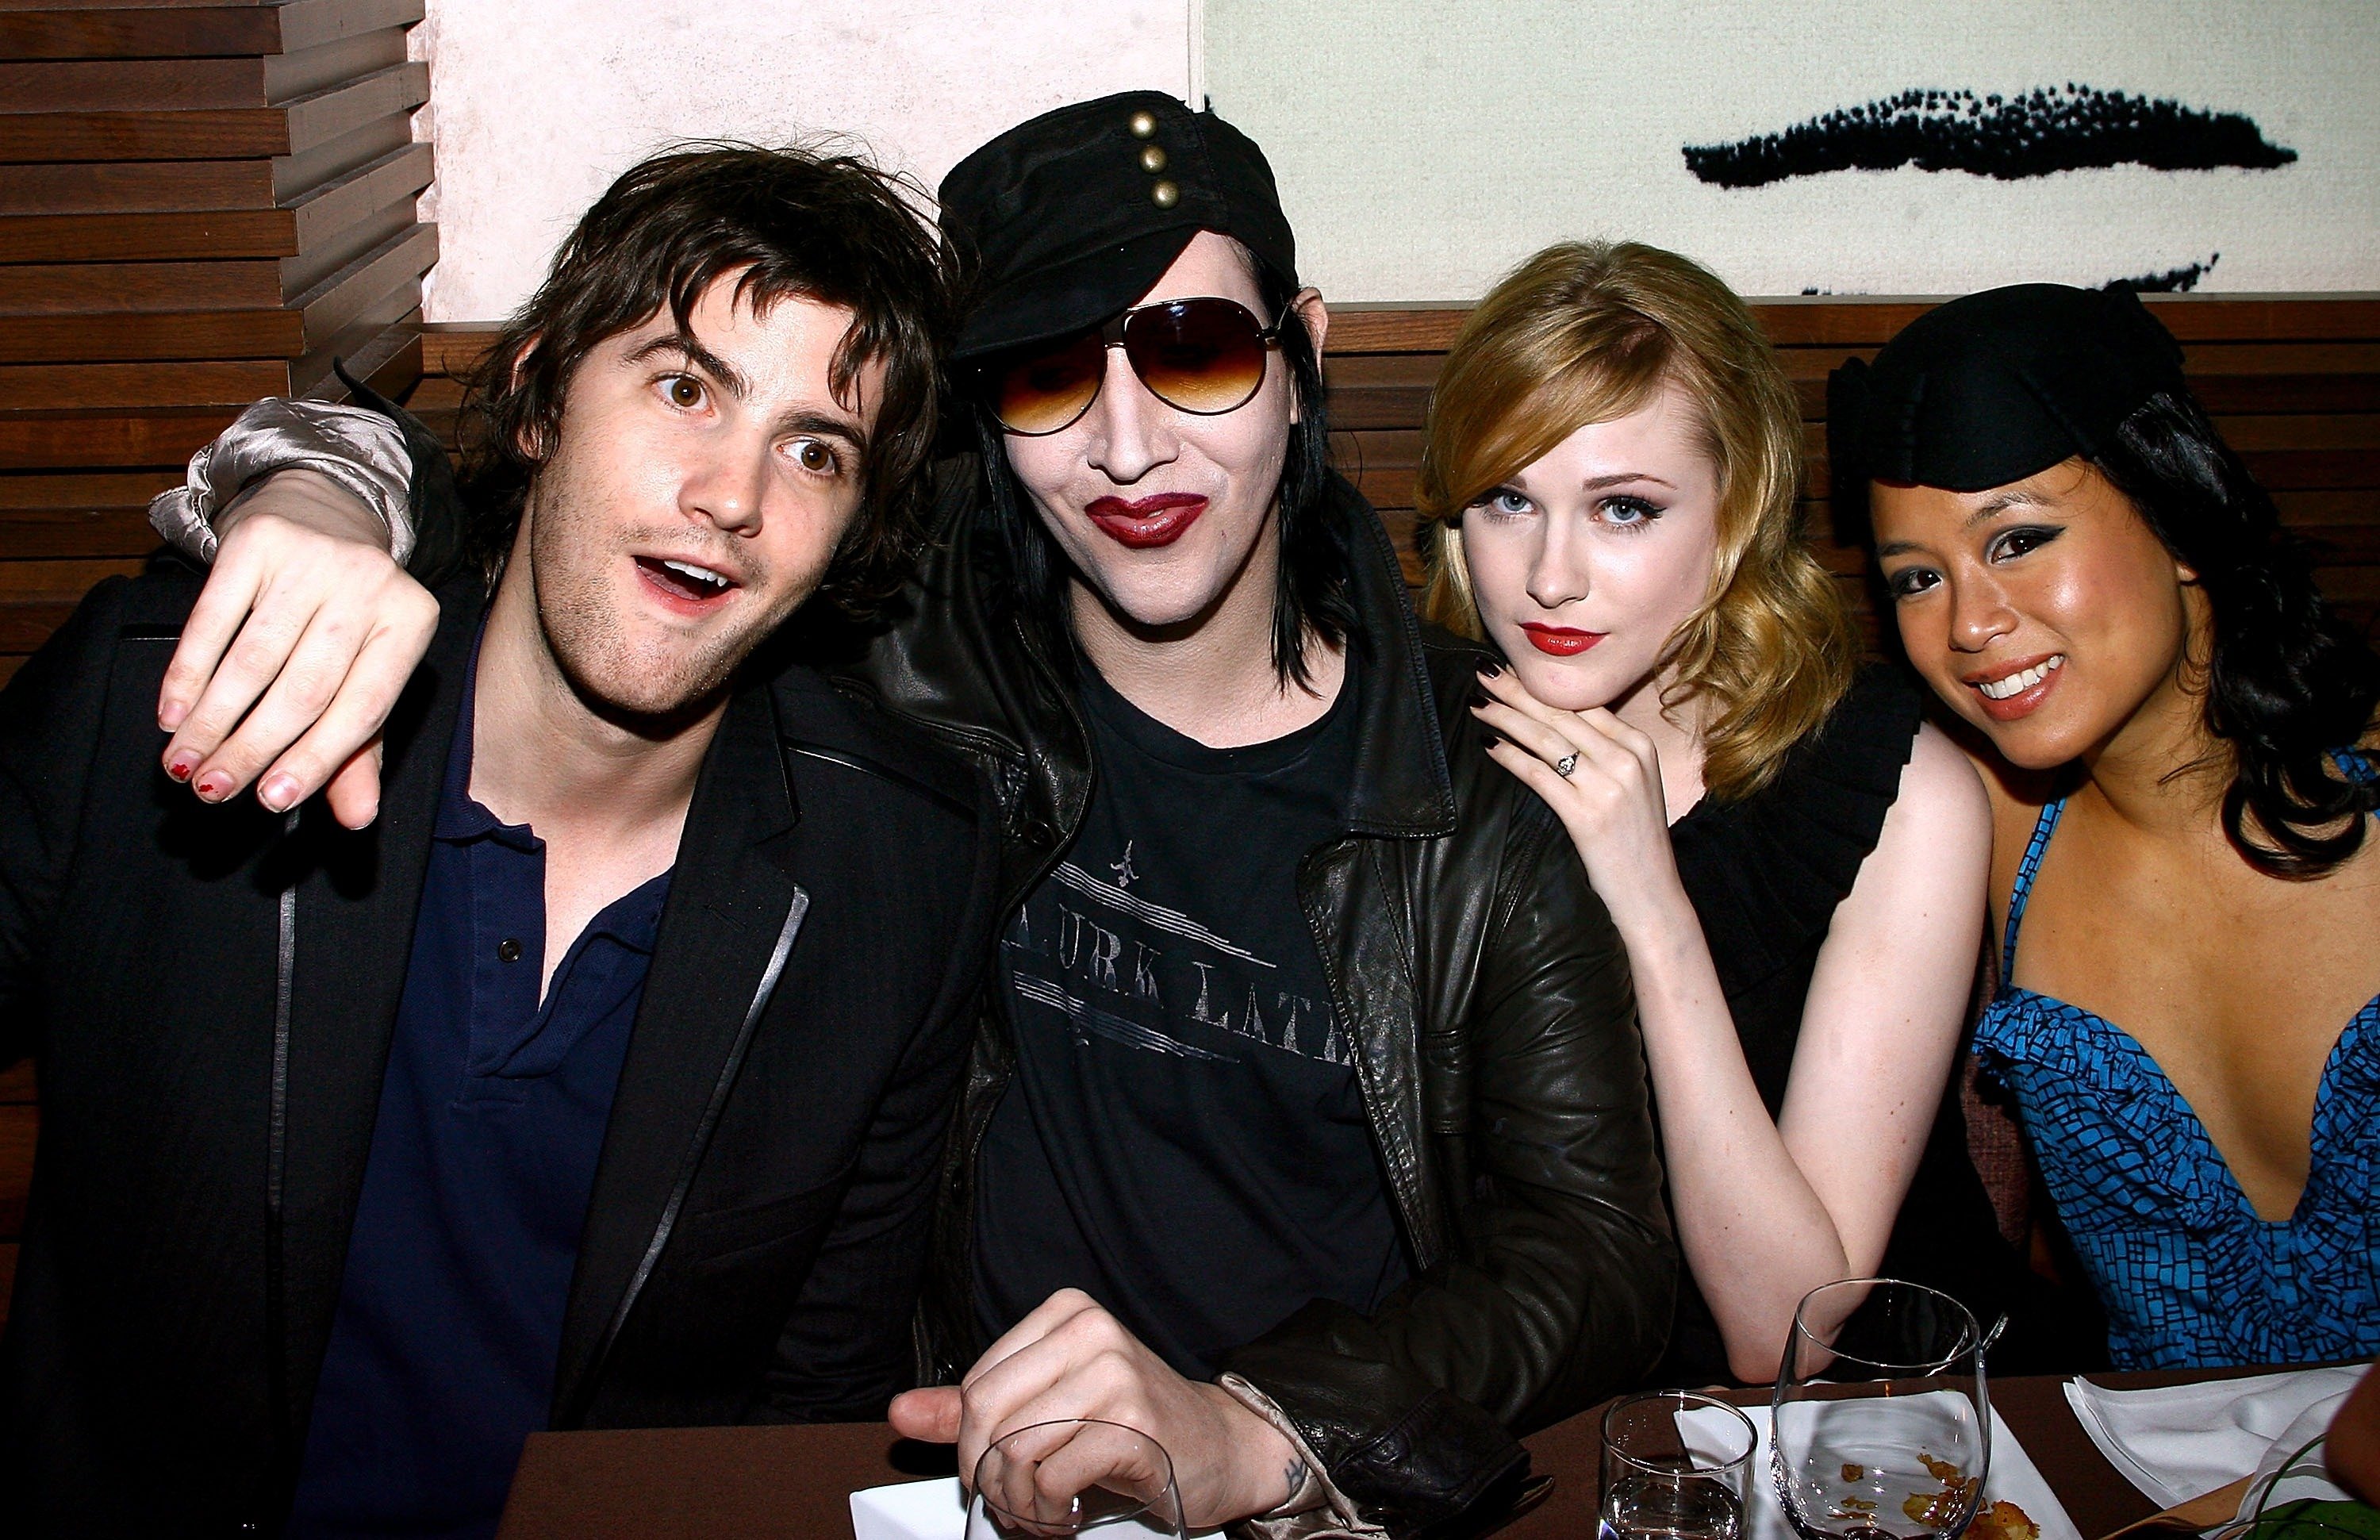 Actor Jim Sturgess, musician Marilyn Manson, actress Evan Rachel Wood and actress T.V. Carpio smile for cameras at the afterparty for 'Across The Universe' in 2007